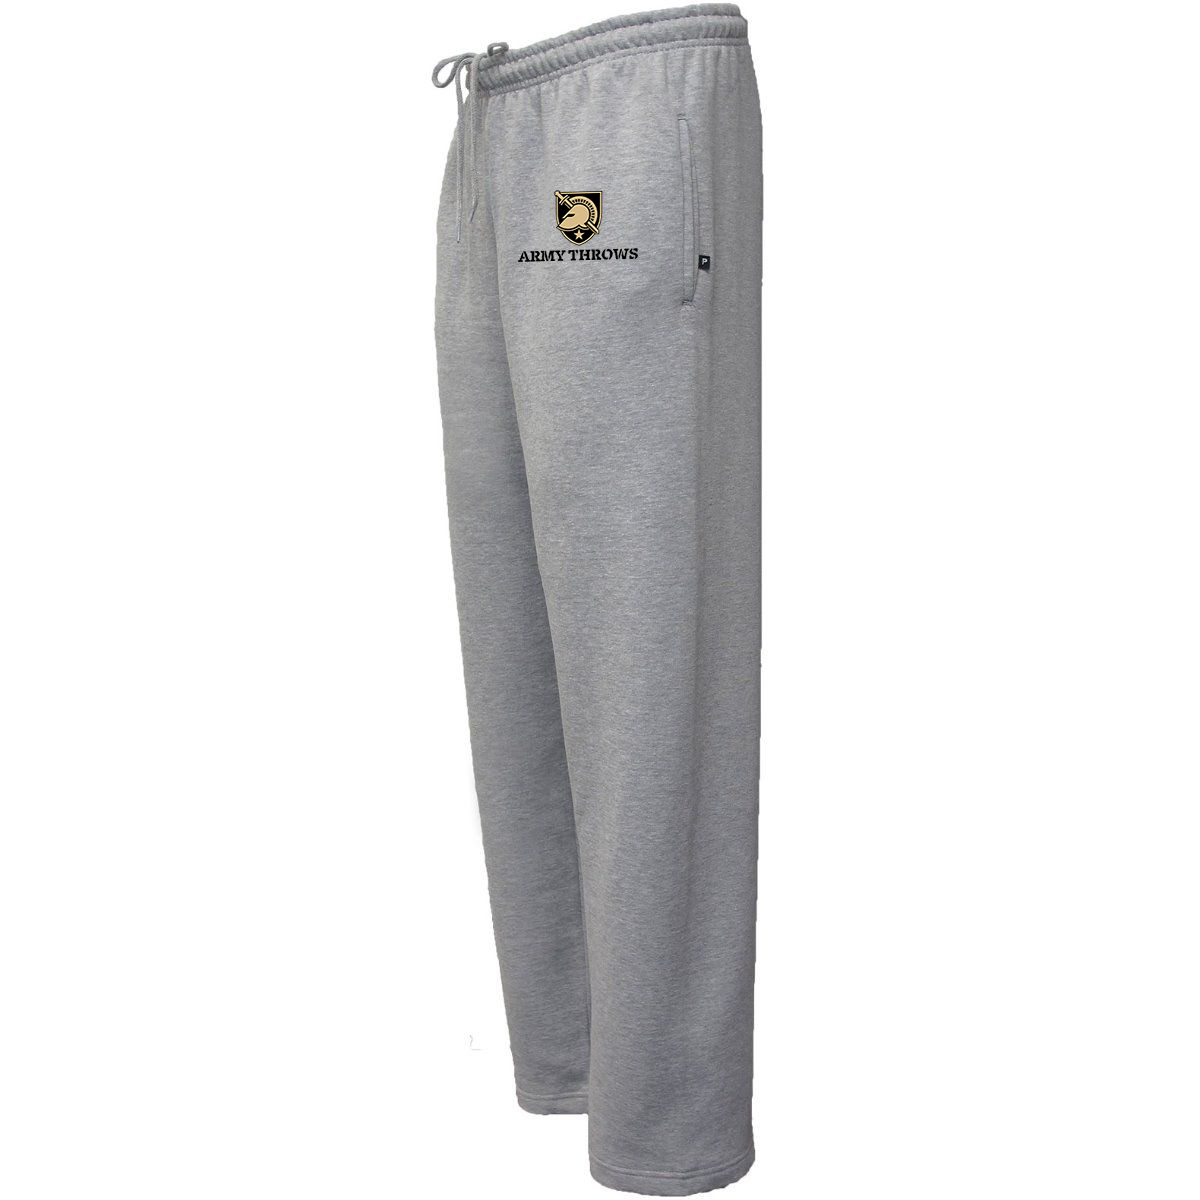 Army Throws Sweatpants